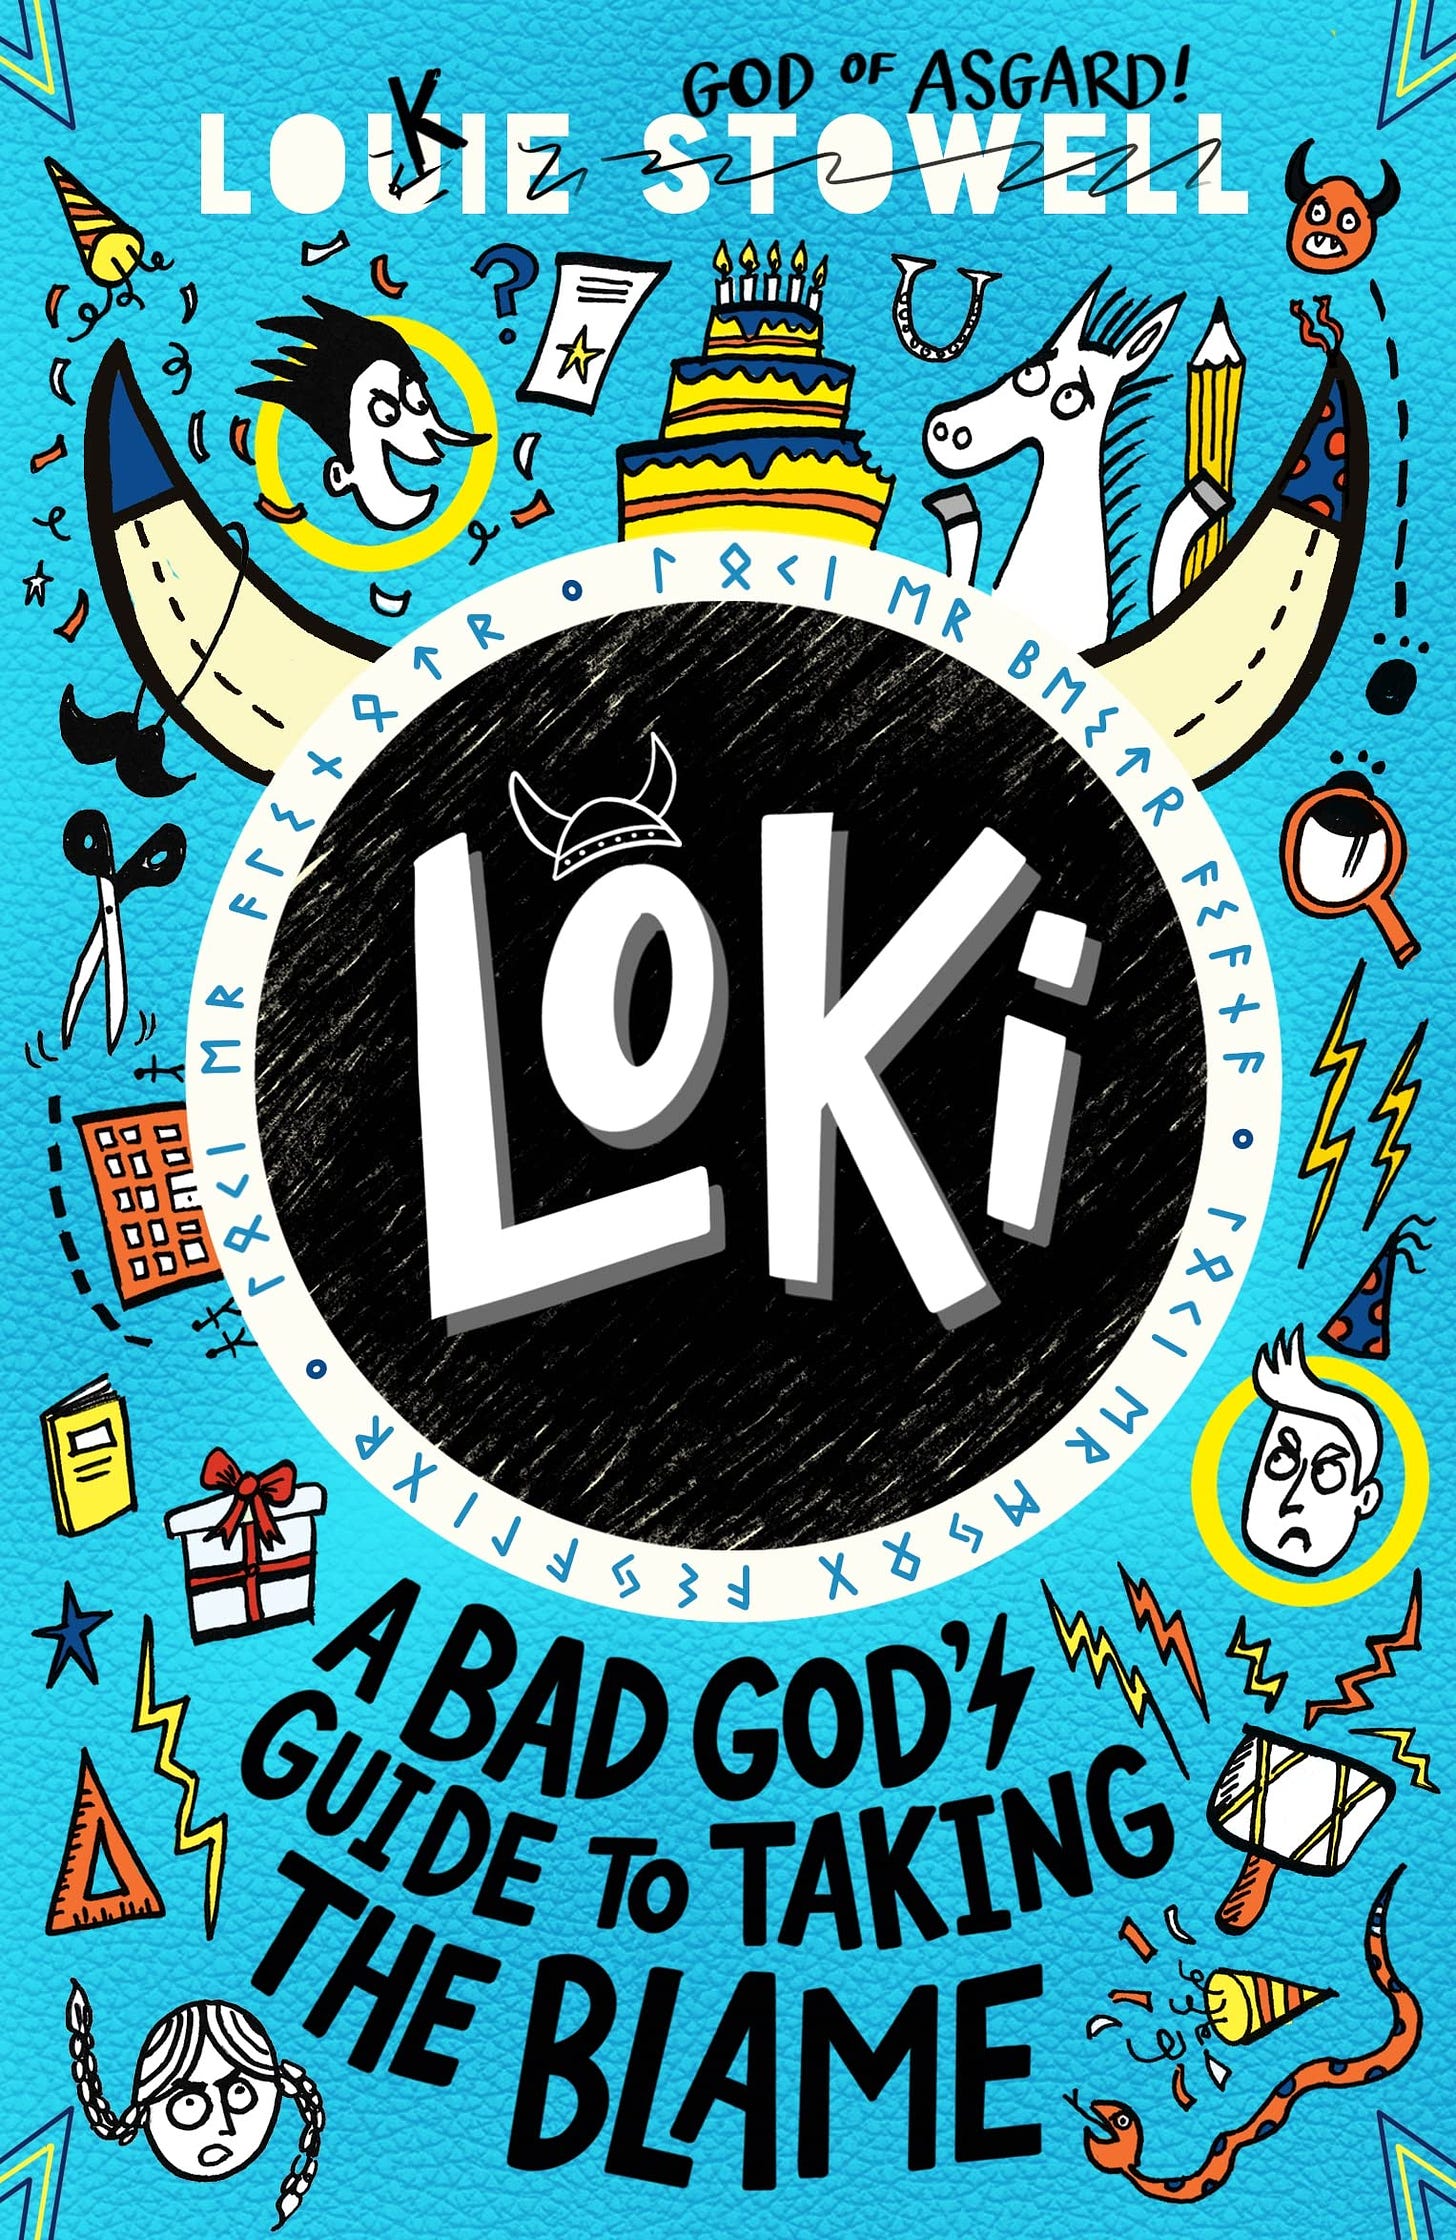 Loki: A Bad God's Guide to Taking the Blame : Stowell, Louie, Stowell, Louie:  Amazon.co.uk: Books